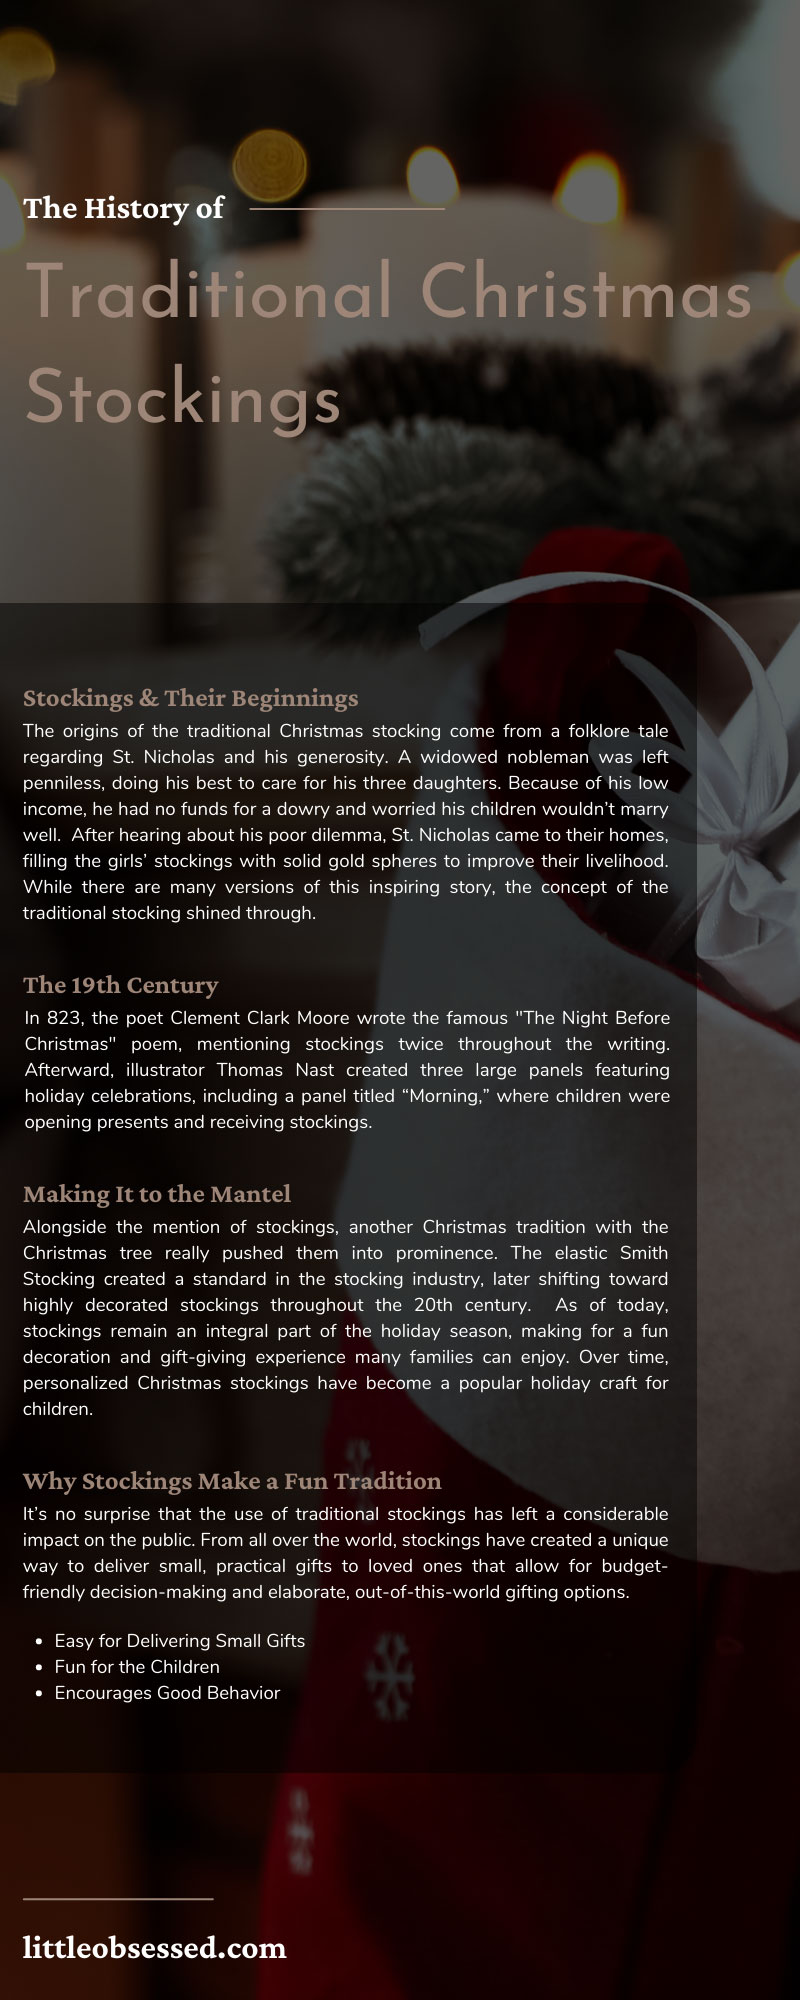 The History of Traditional Christmas Stockings